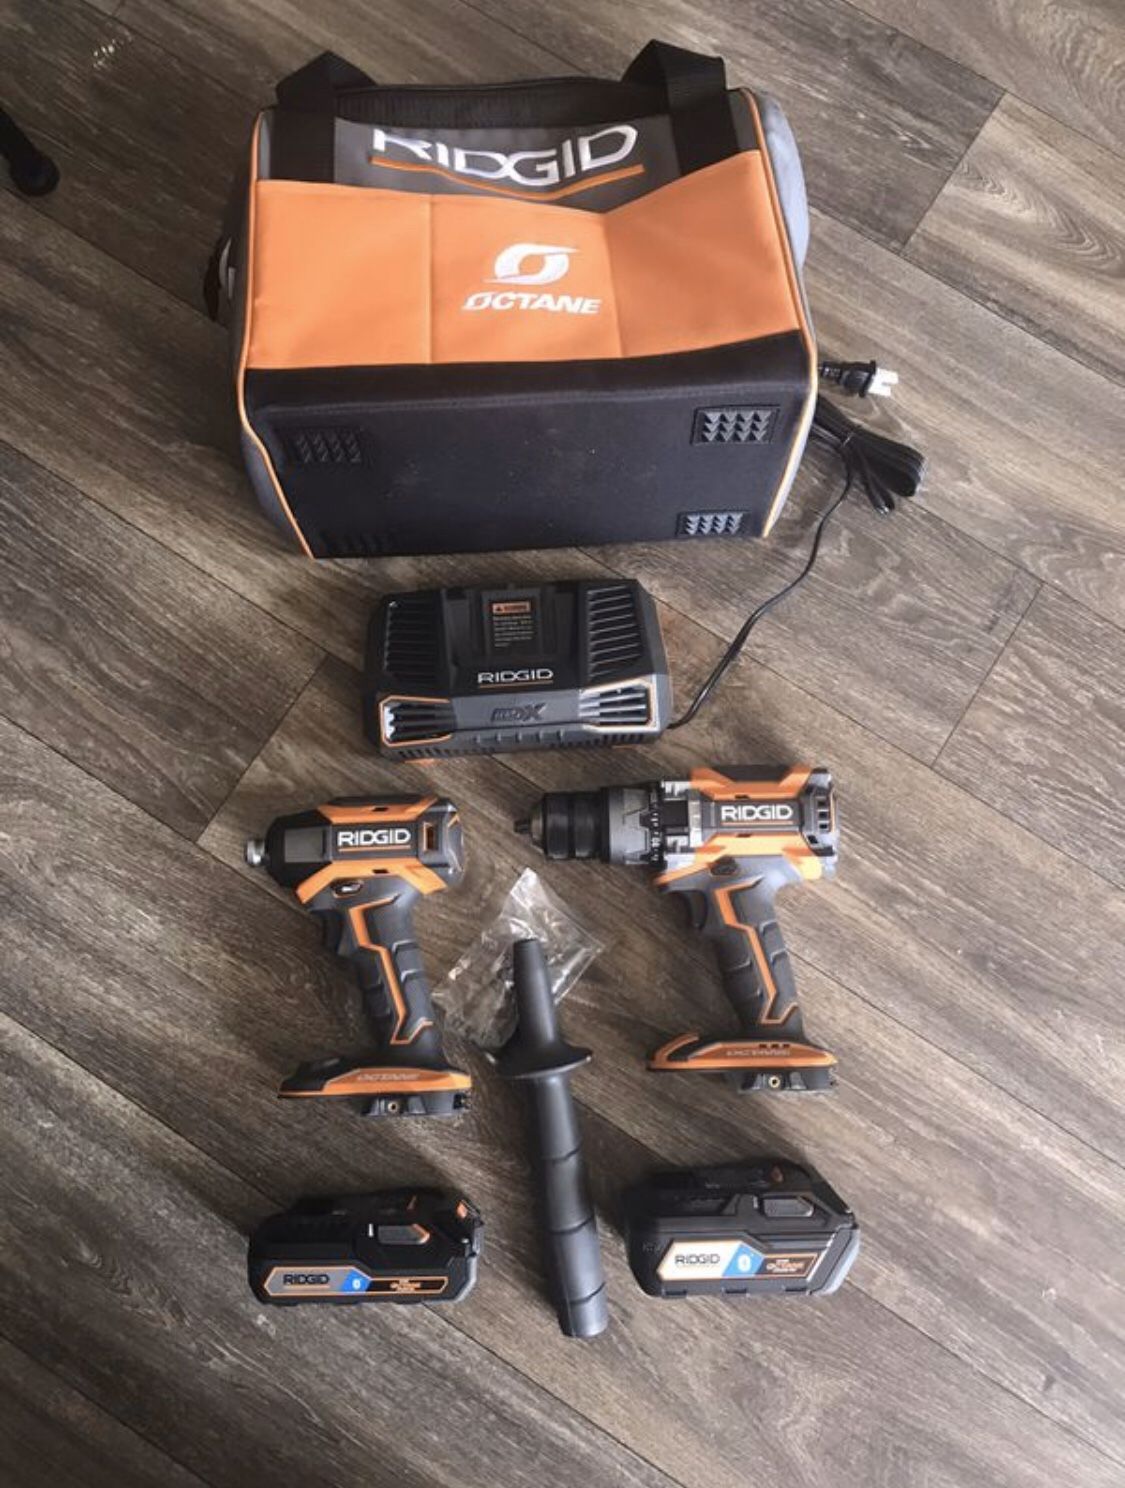 18-Volt OCTANE Lithium-Ion Cordless Brushless Combo Kit with Hammer Drill, Impact Driver, (2) 3.0 Ah Batteries, Charger. New never used.